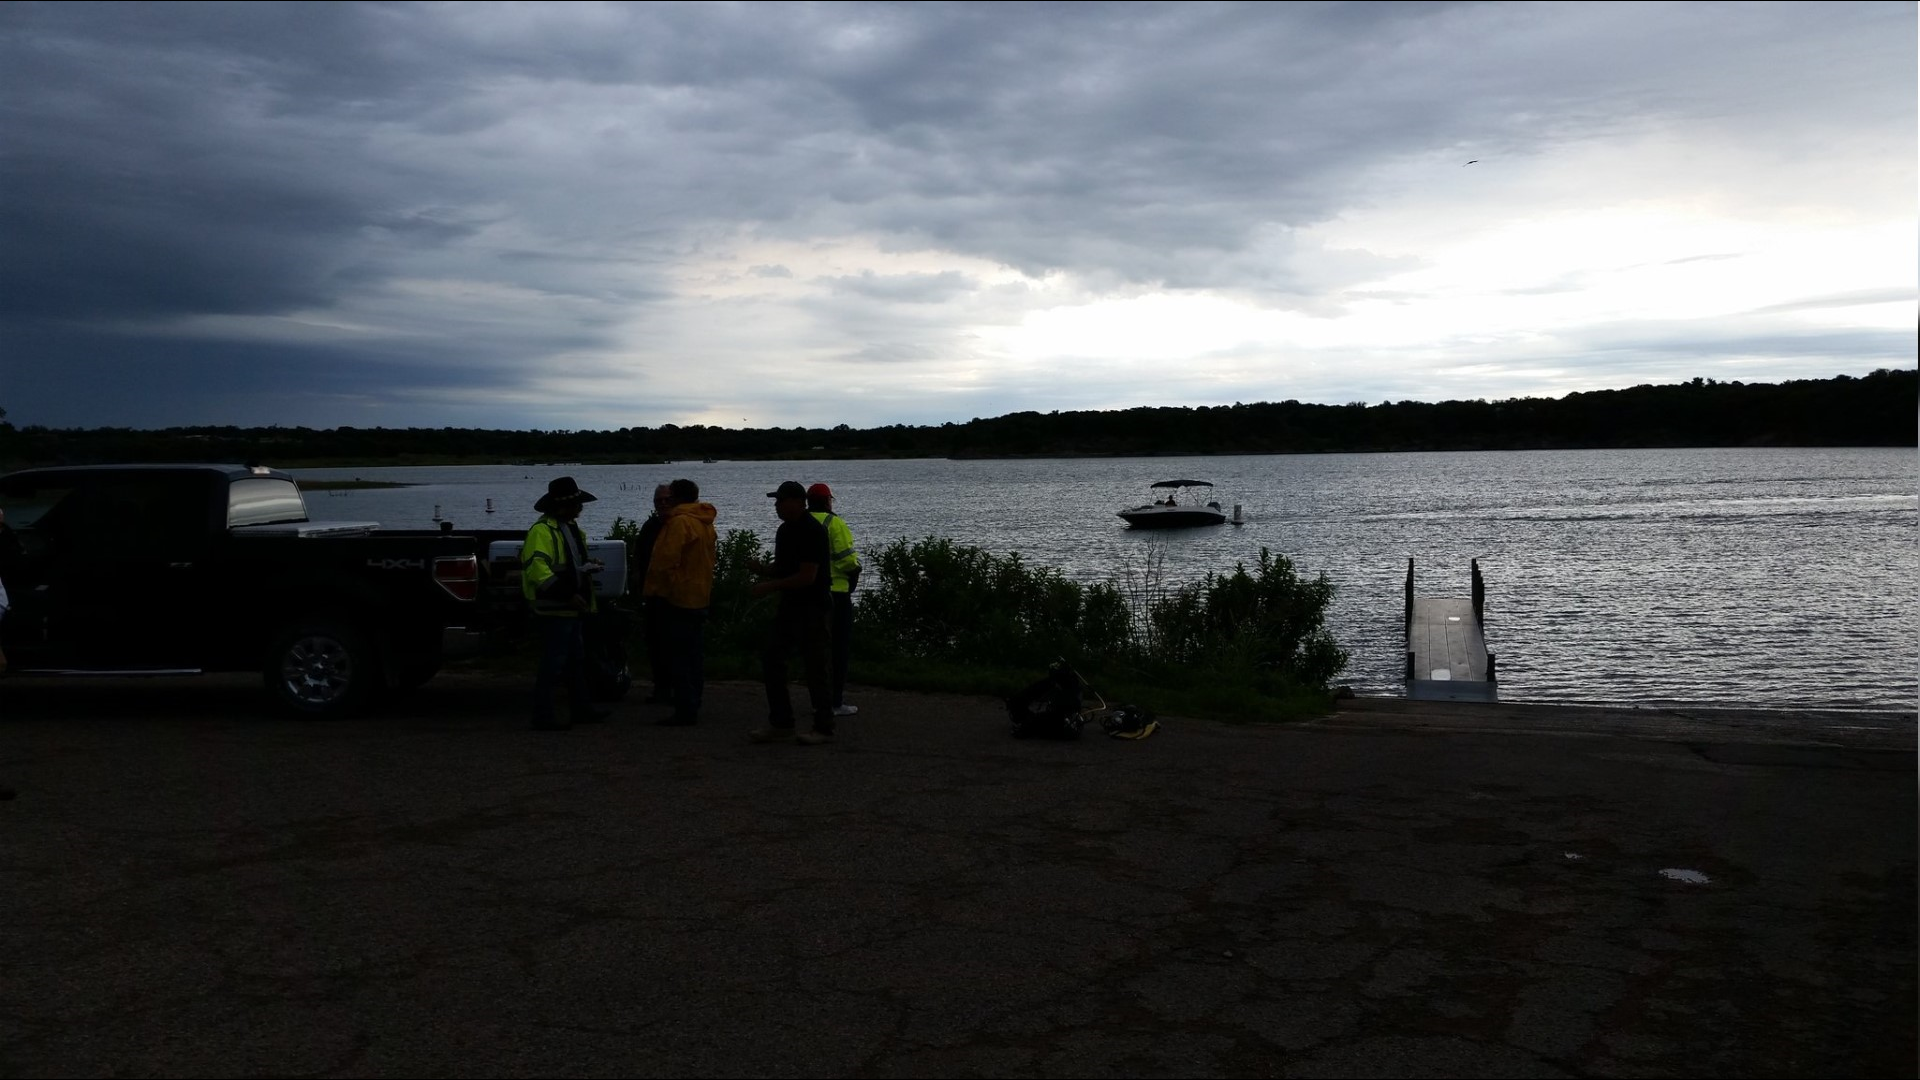 The Whitney Volunteer Fire Department confirmed Tuesday that a 13-year-old girl drowned at Lake Whitney on Monday. We don't yet know the identity of the victim.